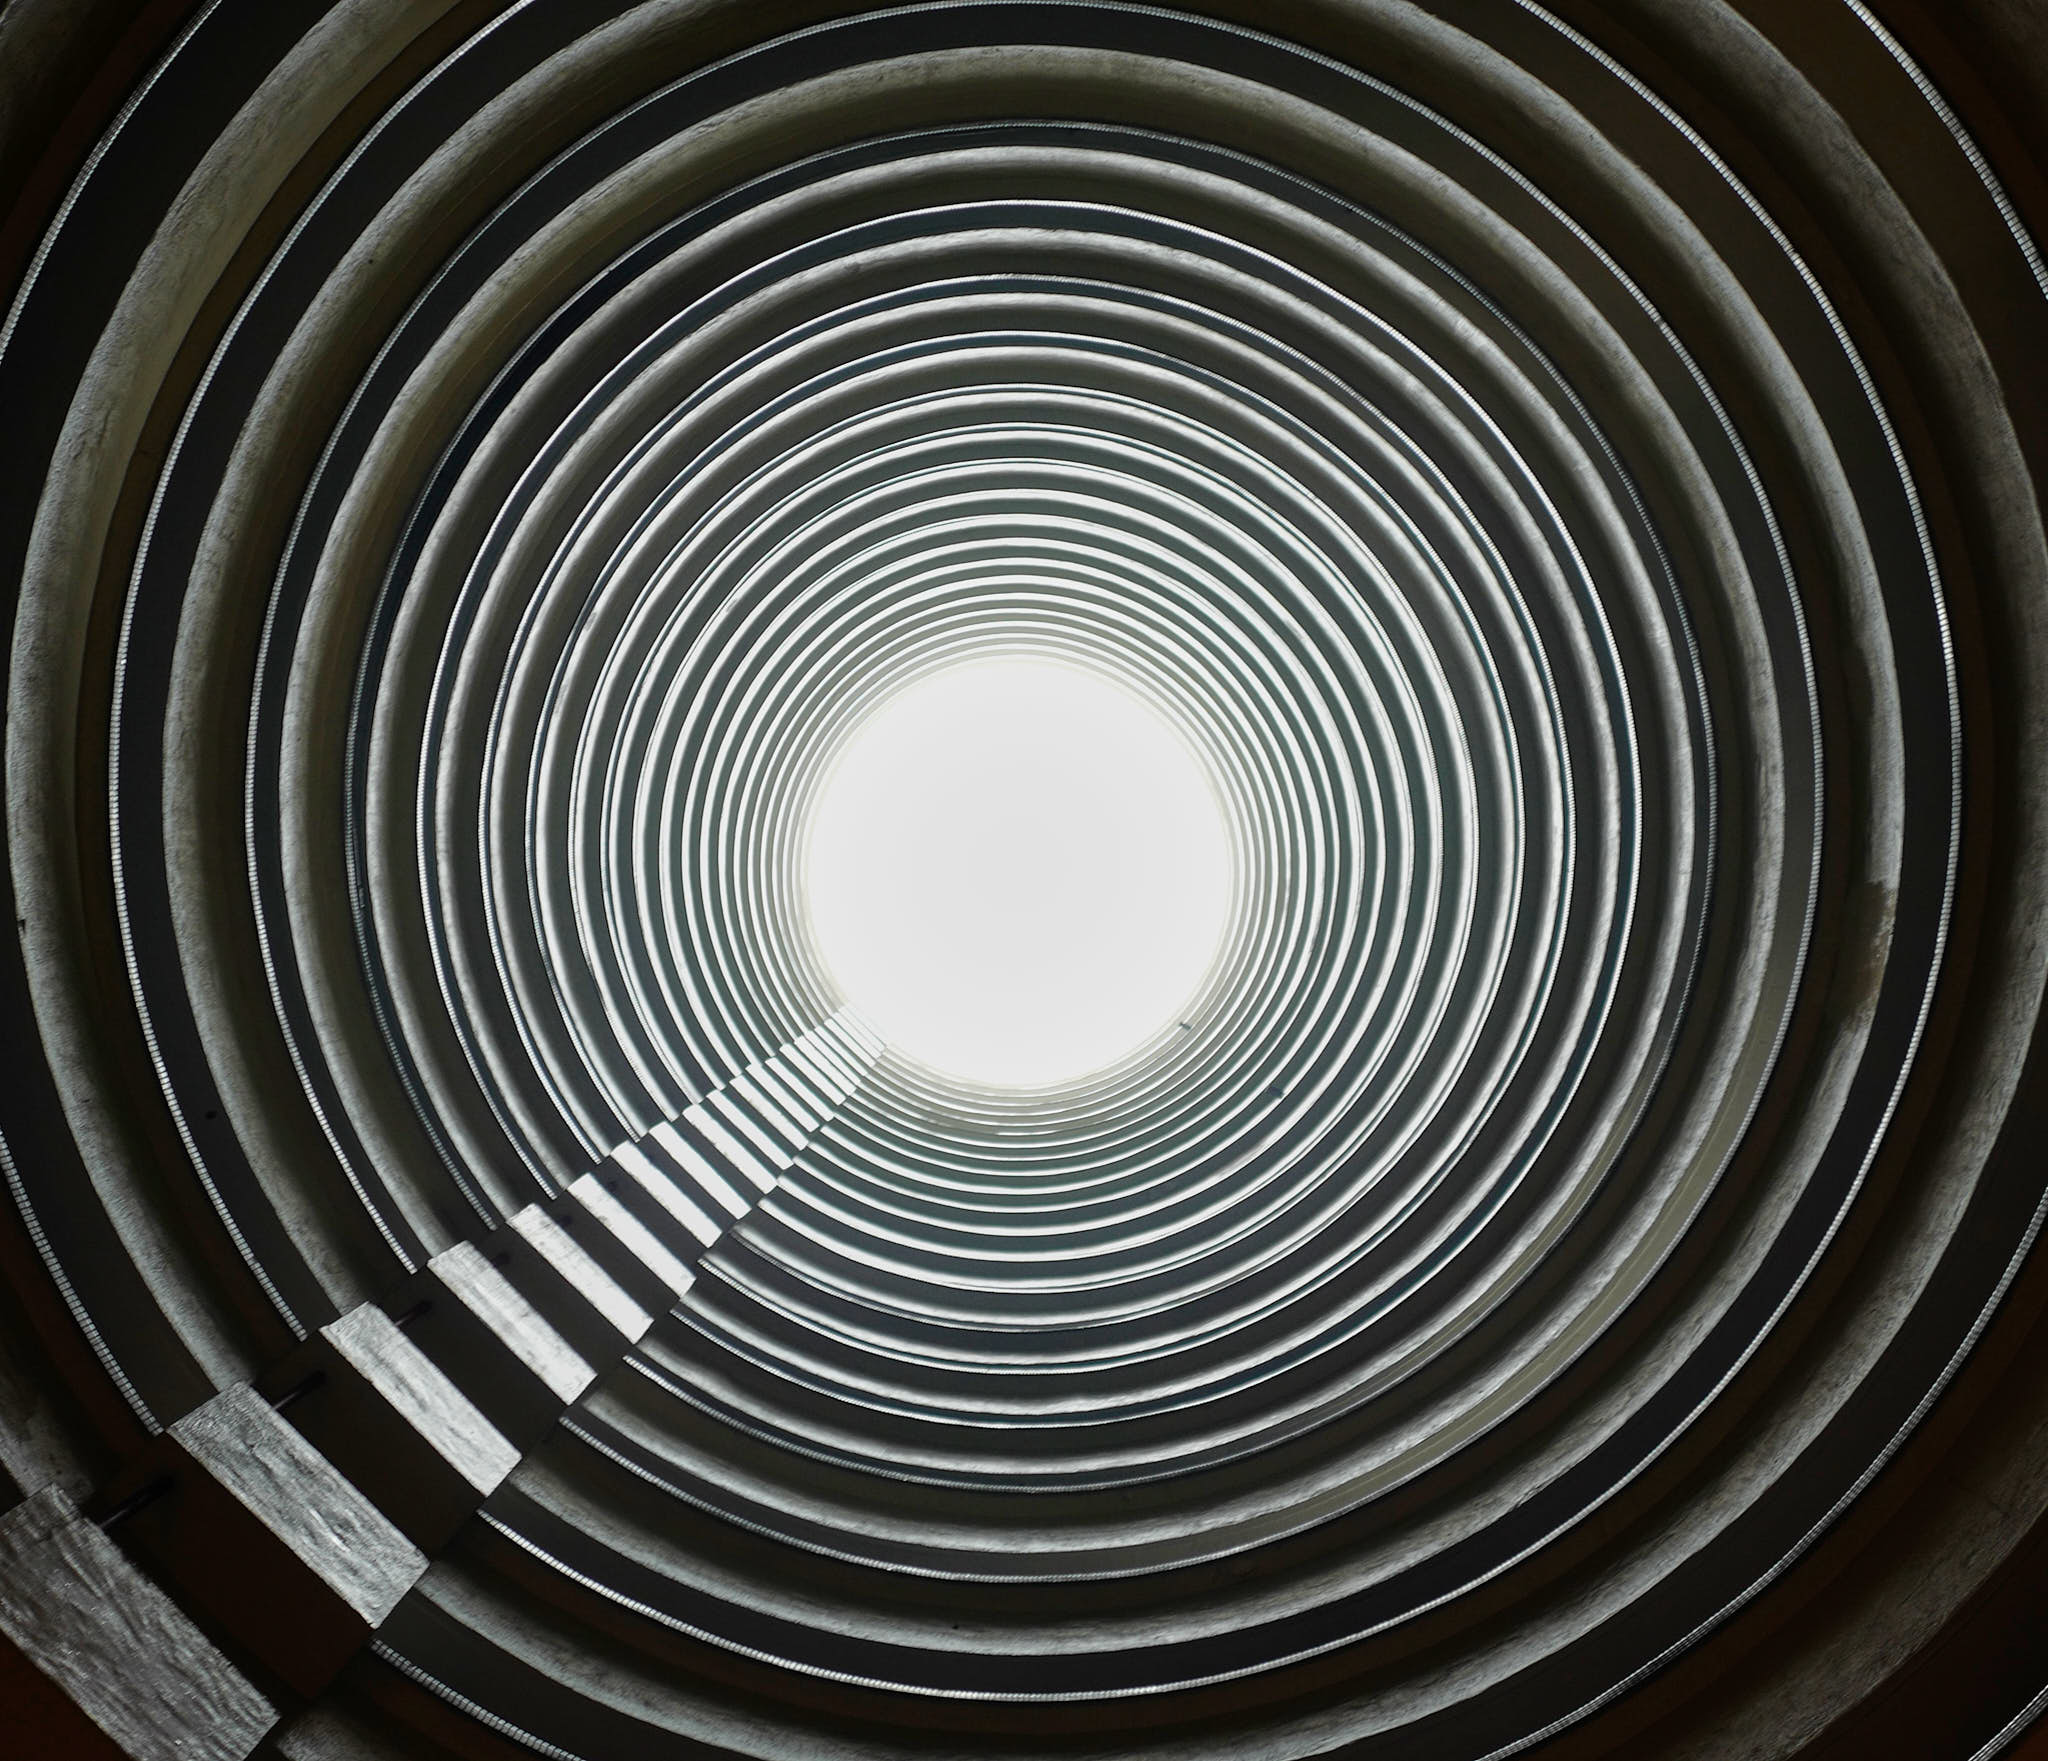 Looking up in a housing complex in Hong Kong, China; LEICA Q (Typ 116) 28mm ISO-100 1/30sec f/1.7